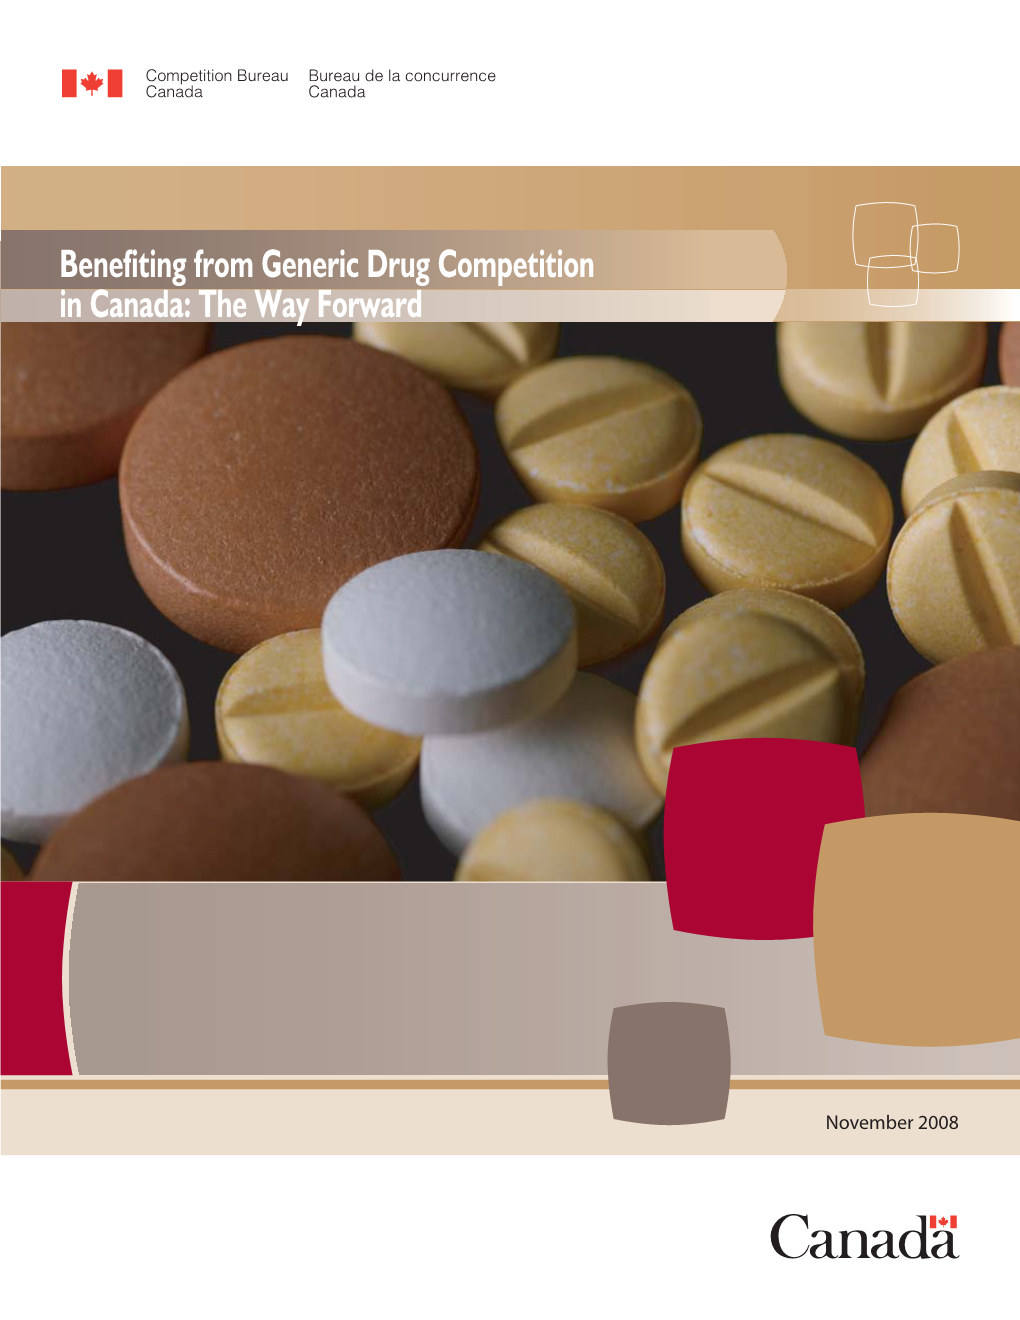 Benefiting from Generic Drug Competition in Canada: the Way Forward